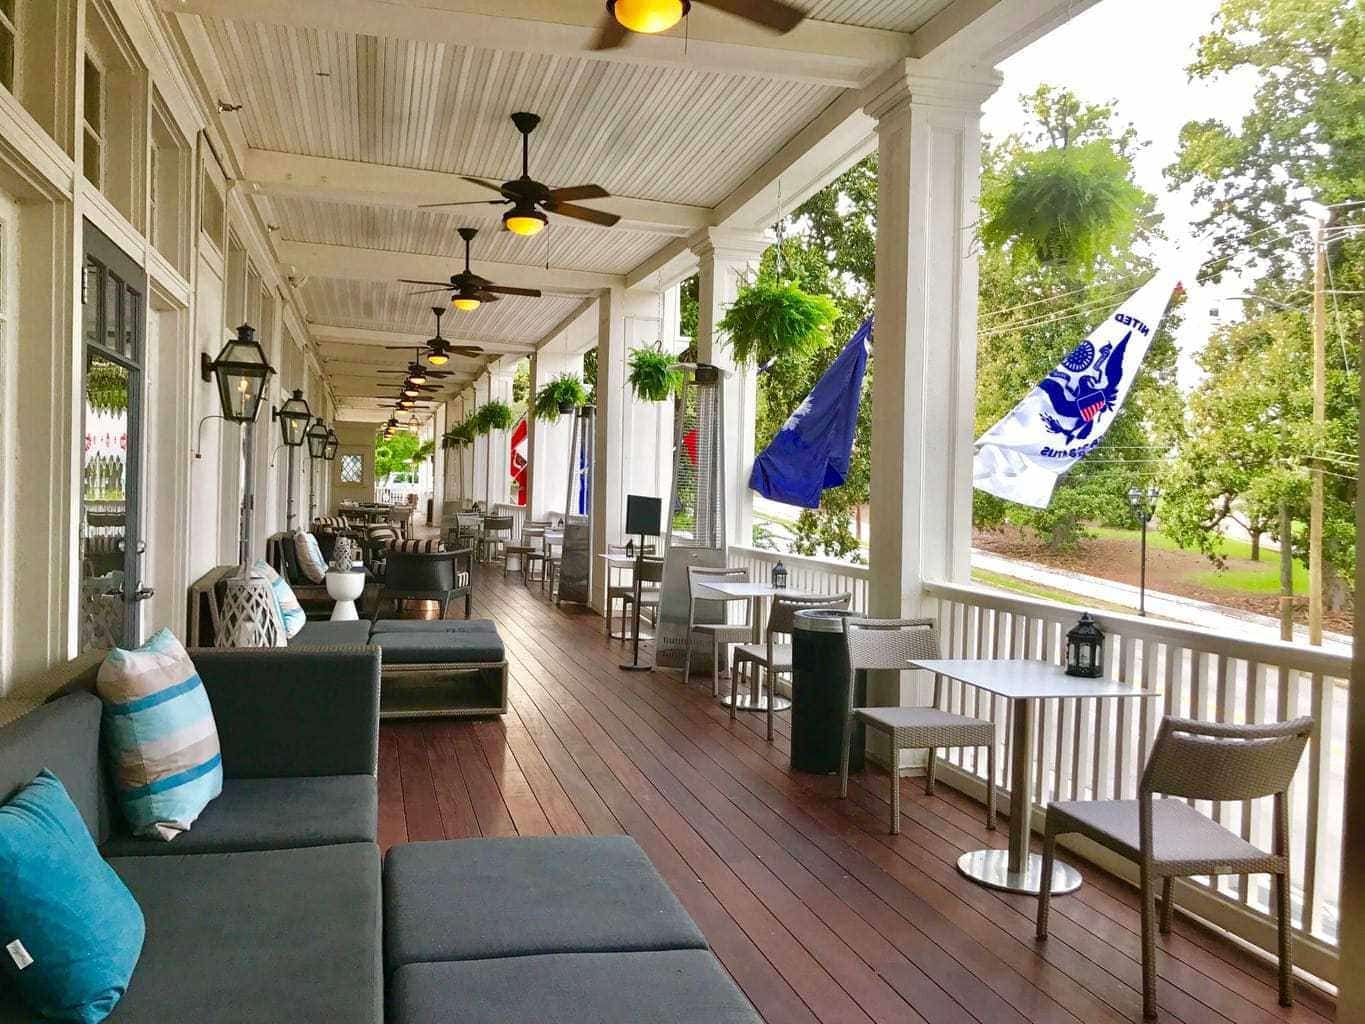 The Partridge Inn Augusta is the perfect blend of modern posh and Southern Charm. With a rich history and modern feel, The Partridge Inn is perfect.